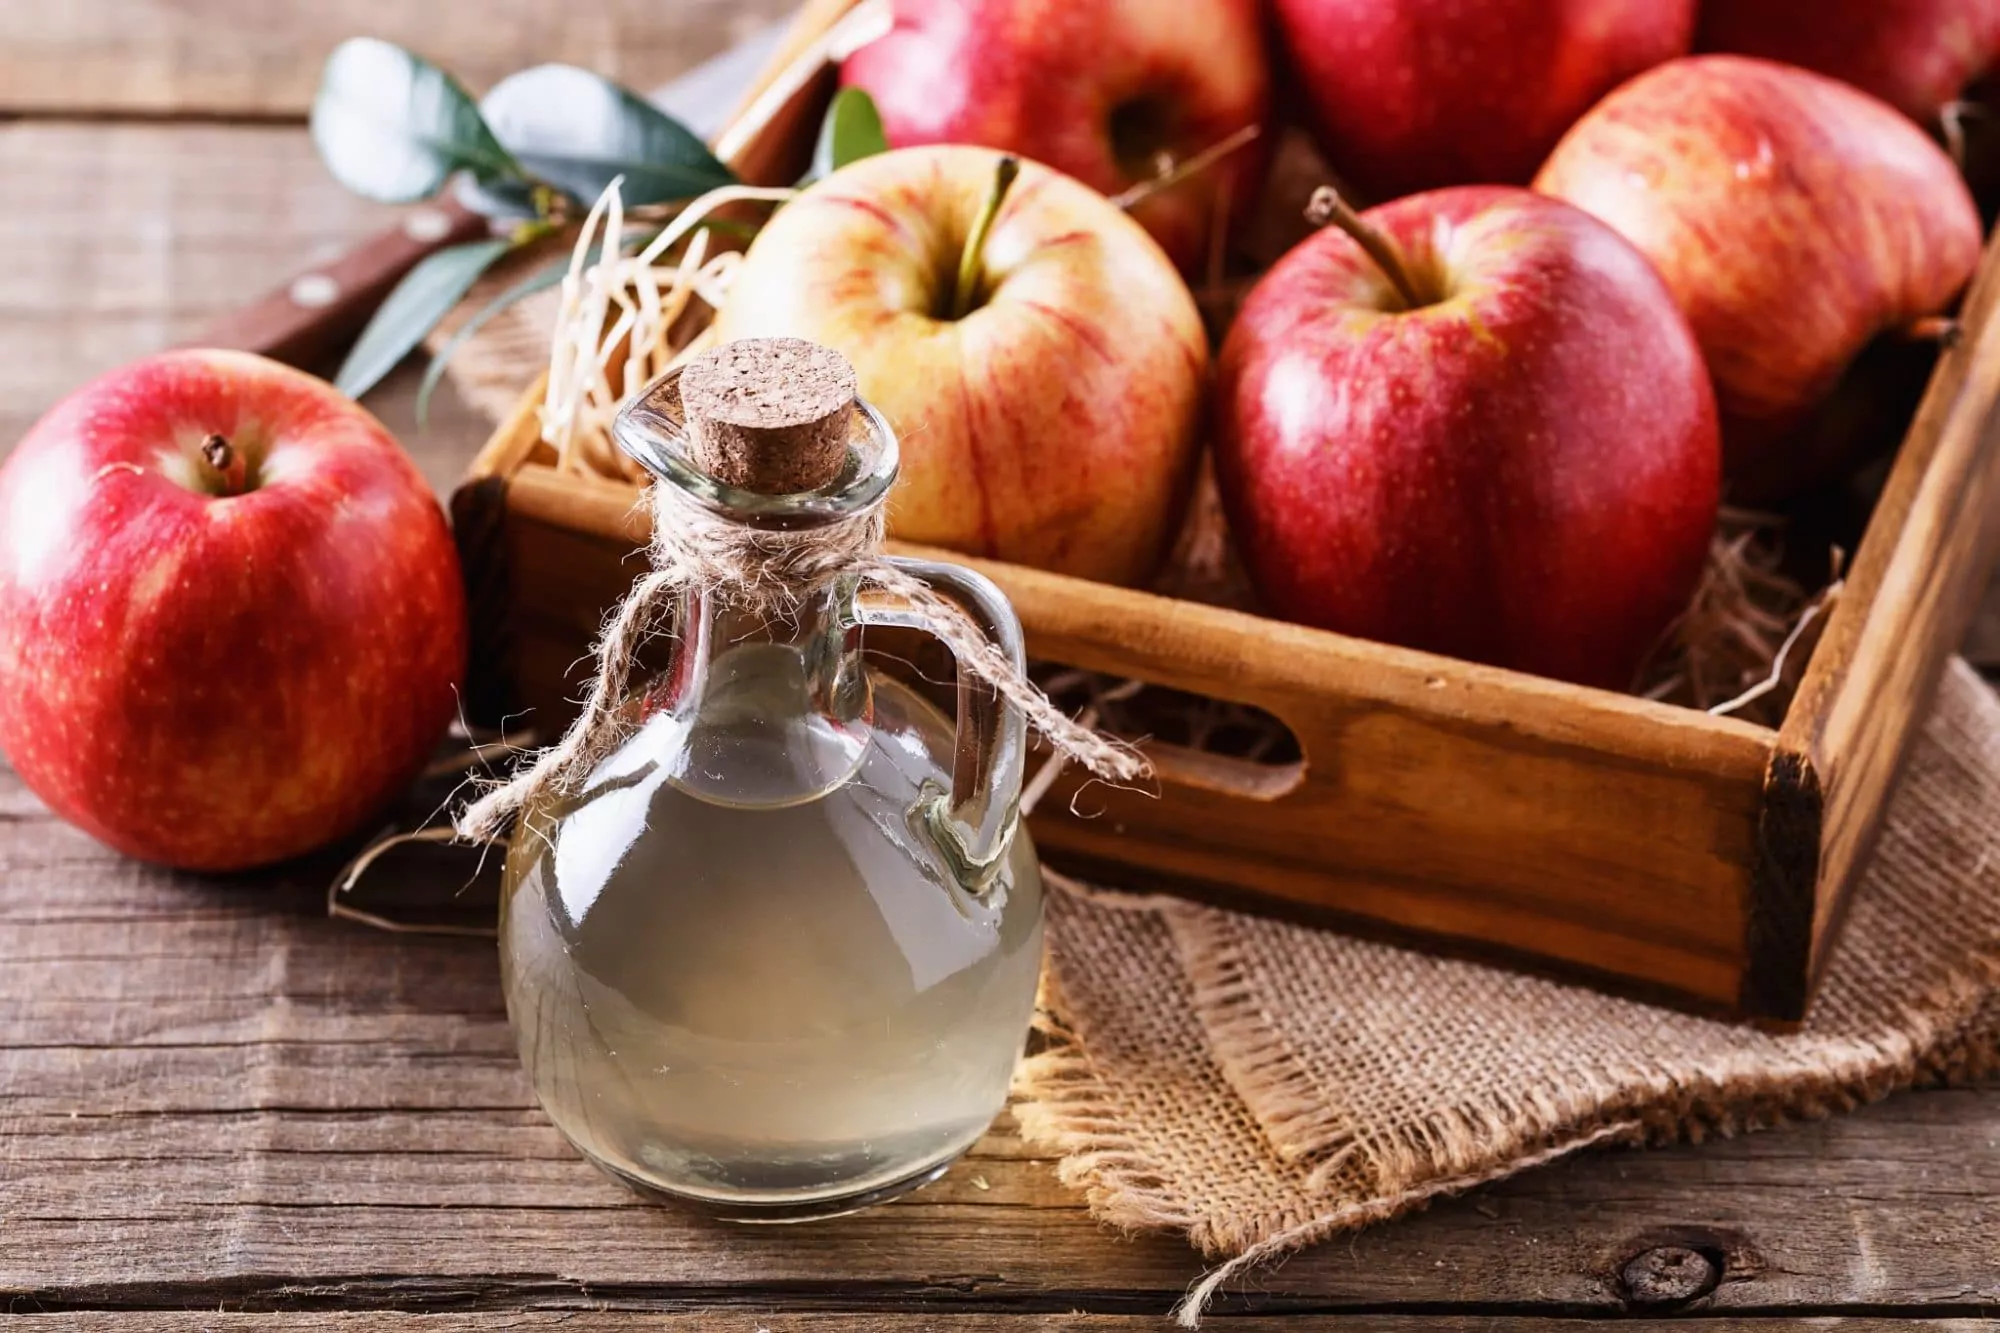 Apple cider vinegar for hair and skin: 5 things to know